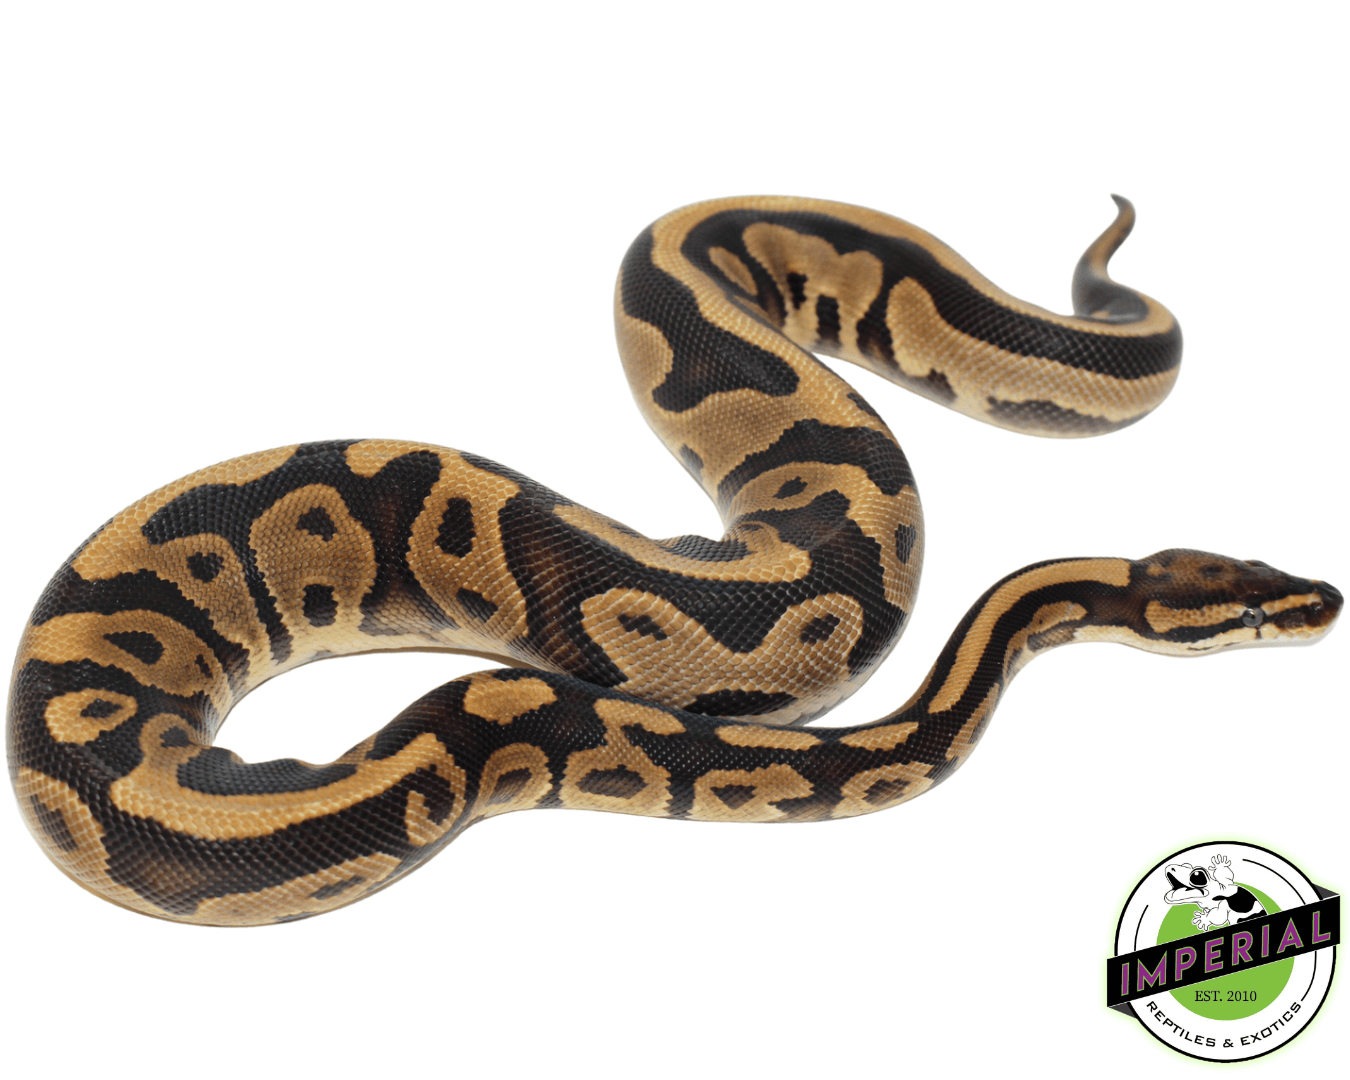 Specter Leopard ball python for sale, buy reptiles online